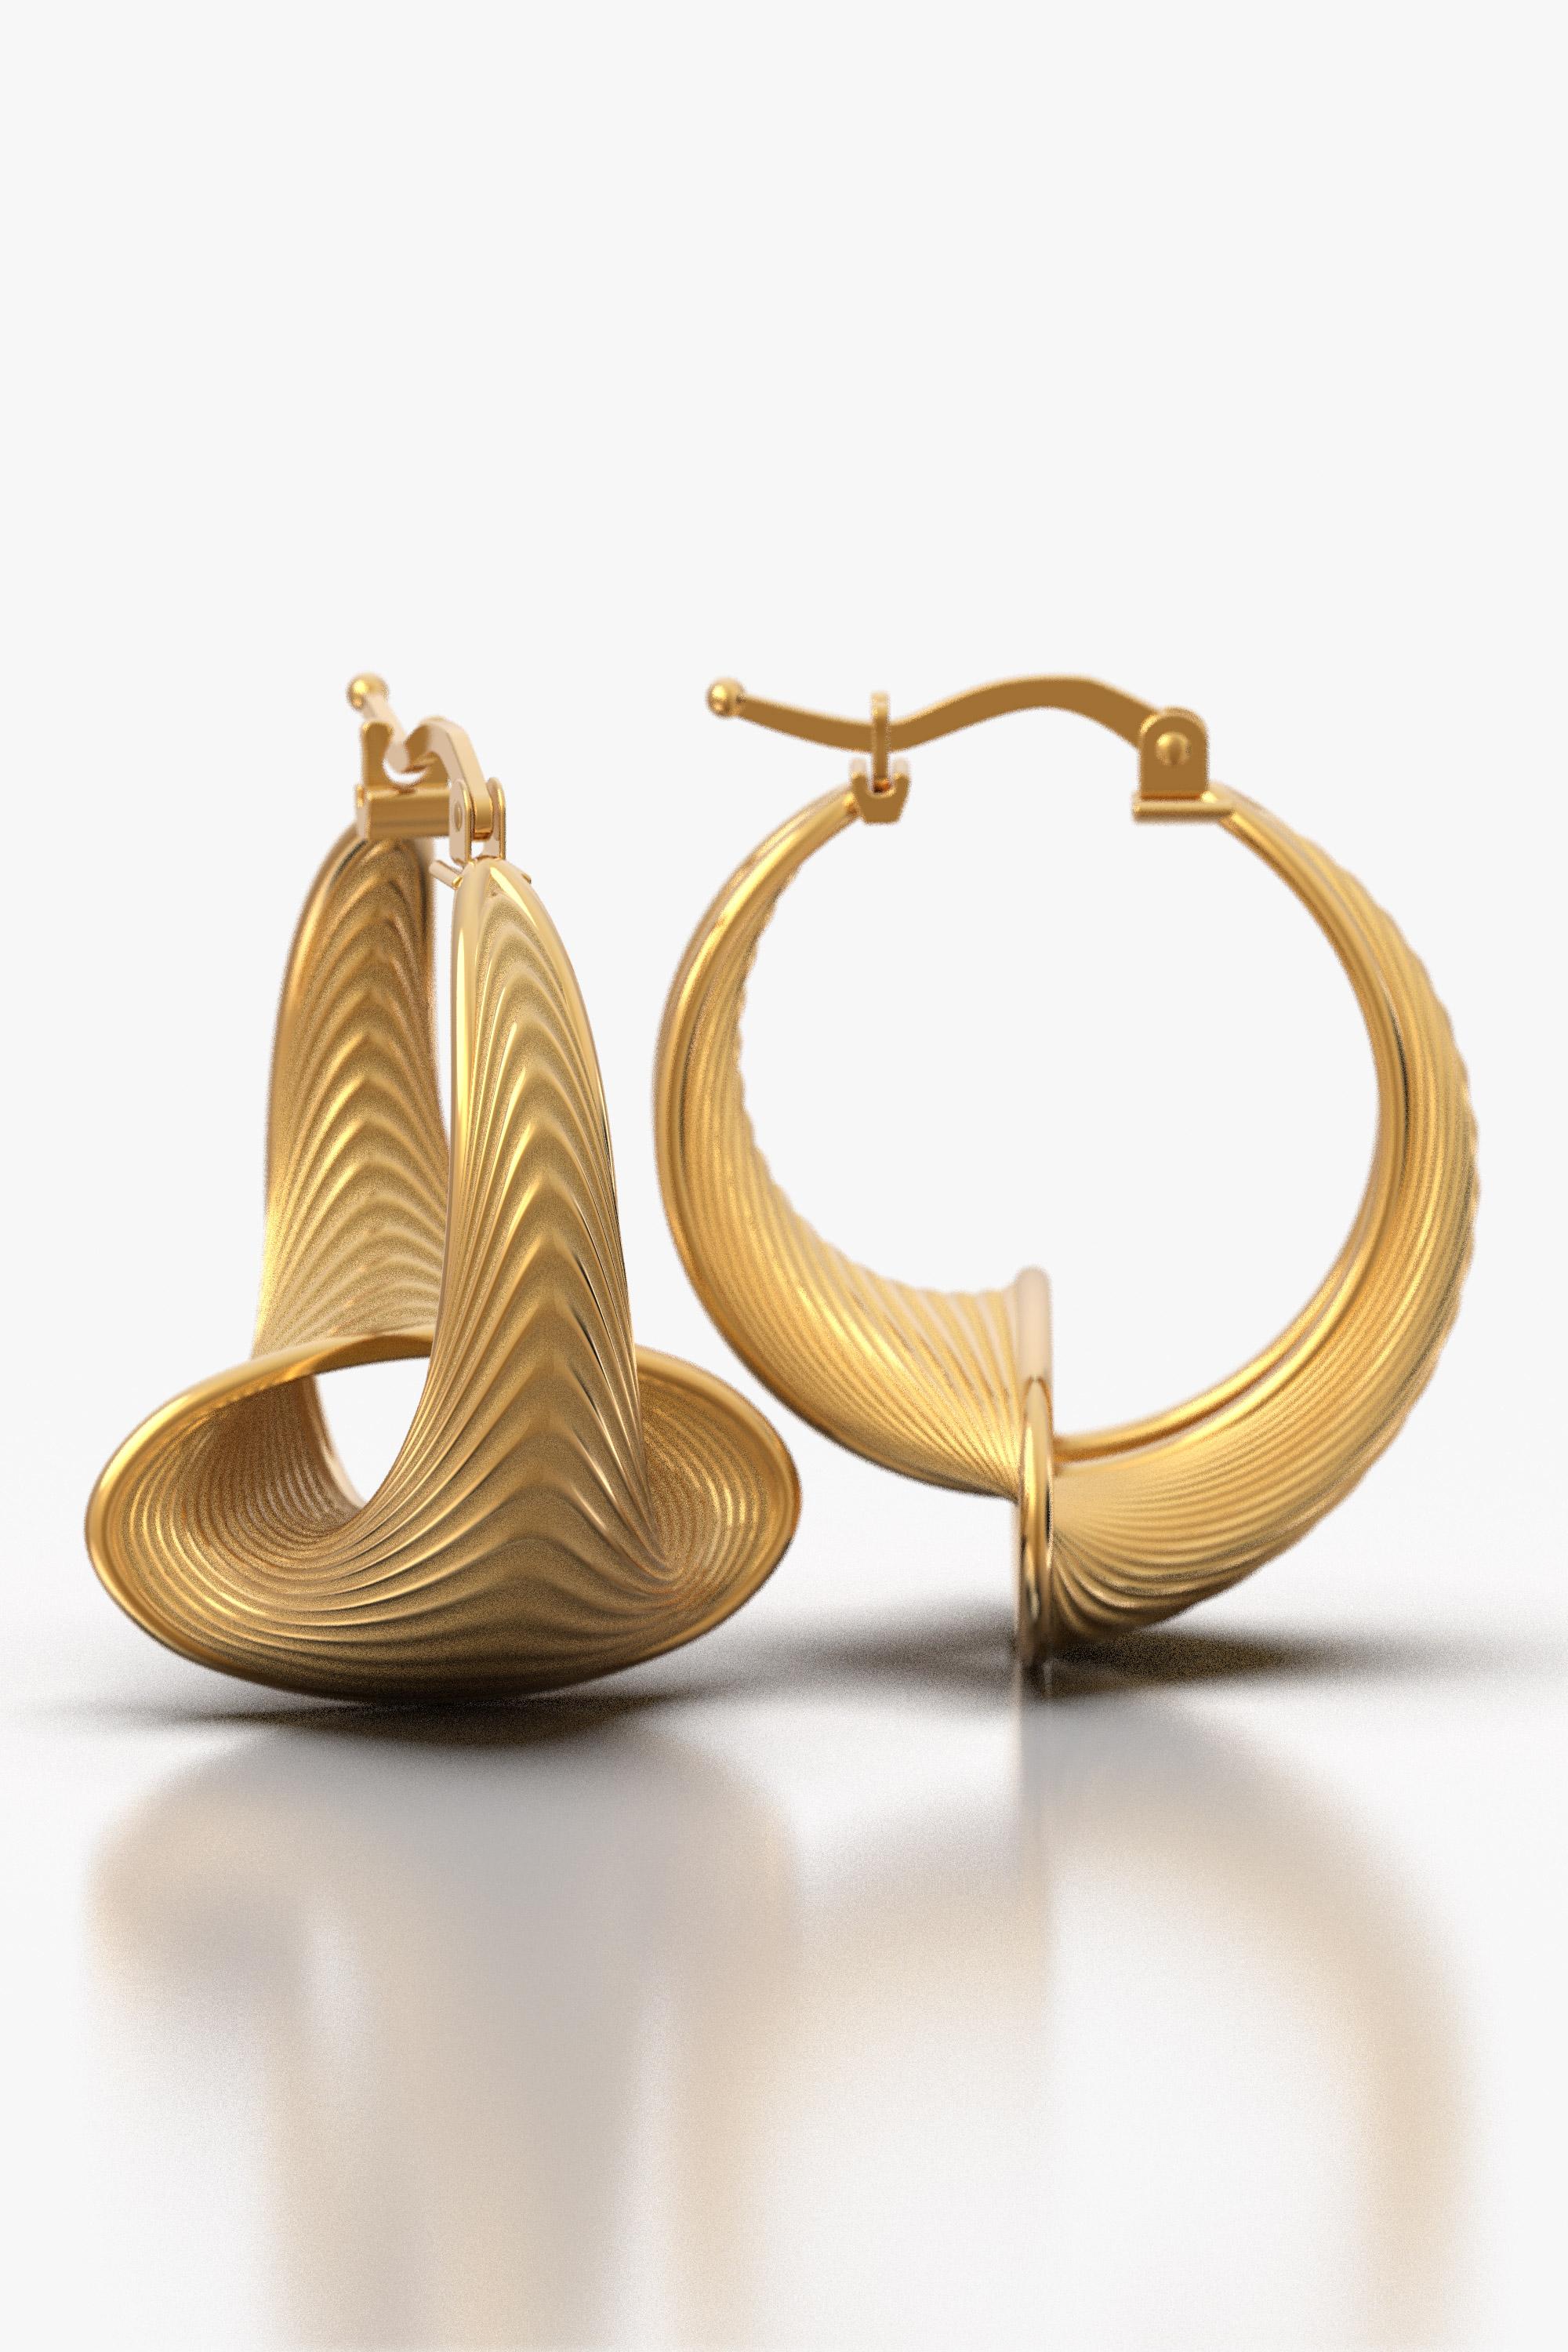 Stunning Hoop Earrings Only Made to Order 14k Gold, Made in Italy by Oltremare  For Sale 1